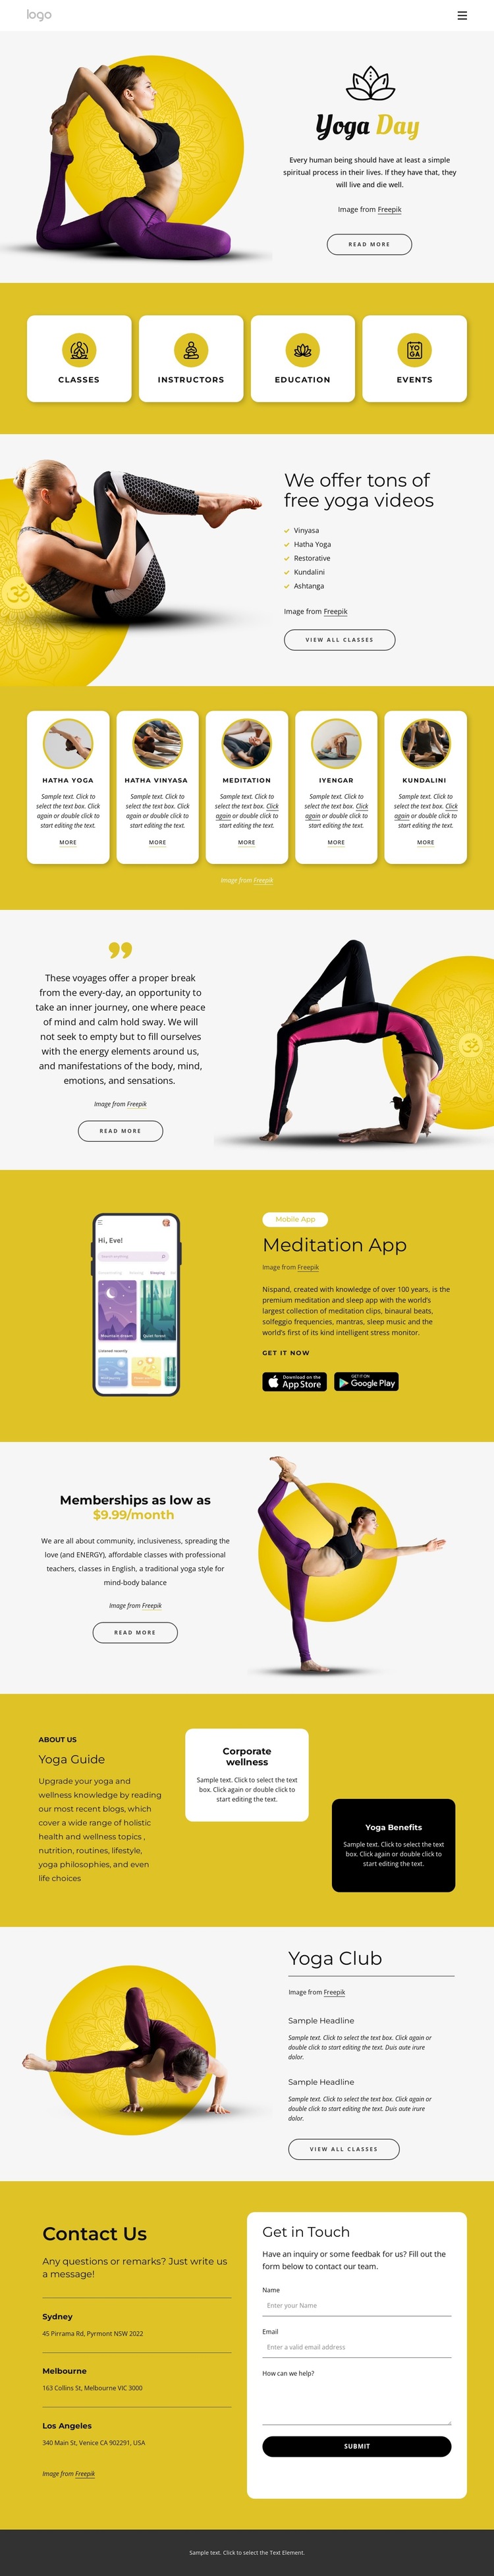 Yoga events and classes HTML5 Template